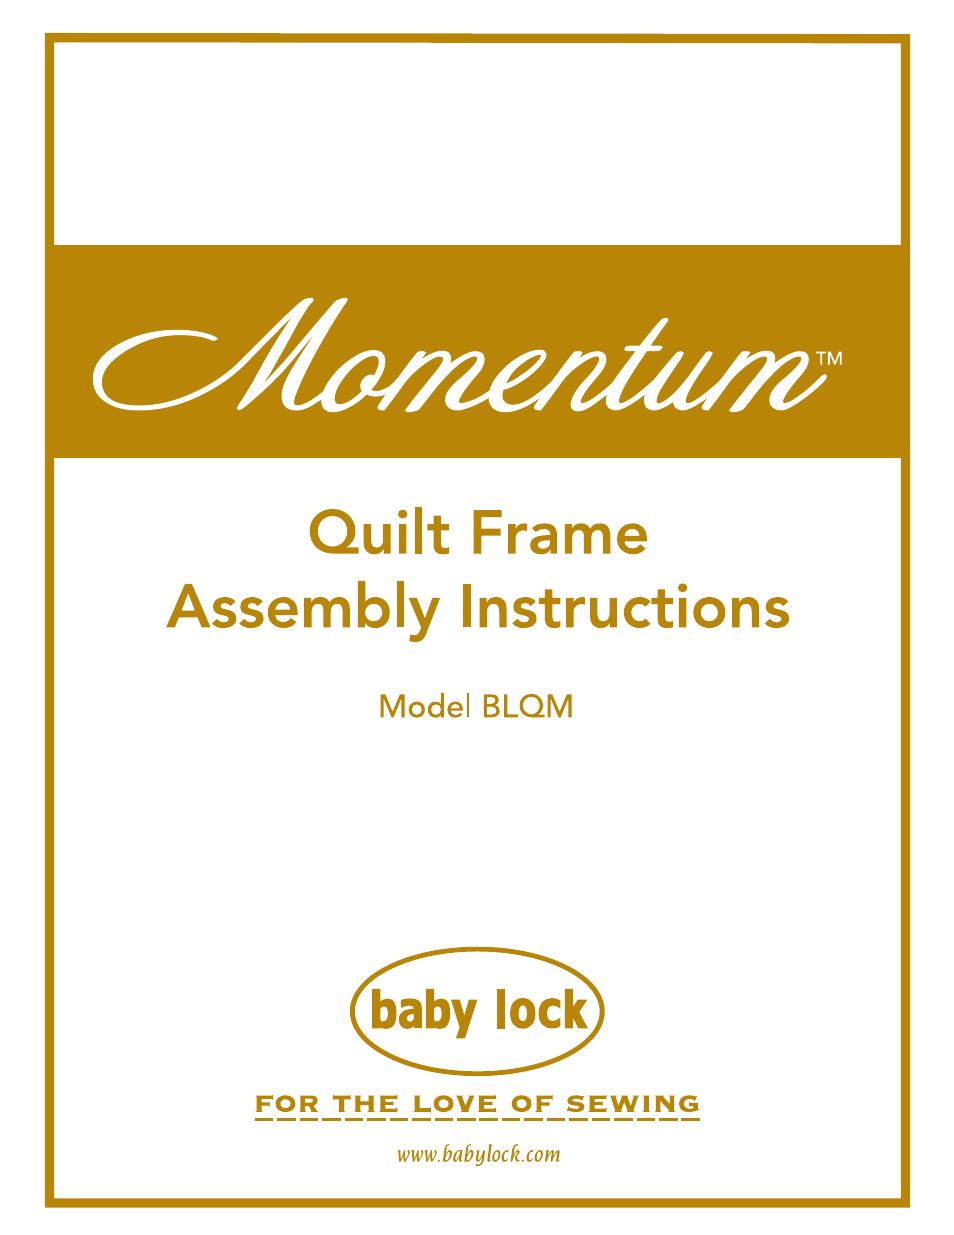 Momentum Quilting Frame (BLQM) Instruction and Reference Guide